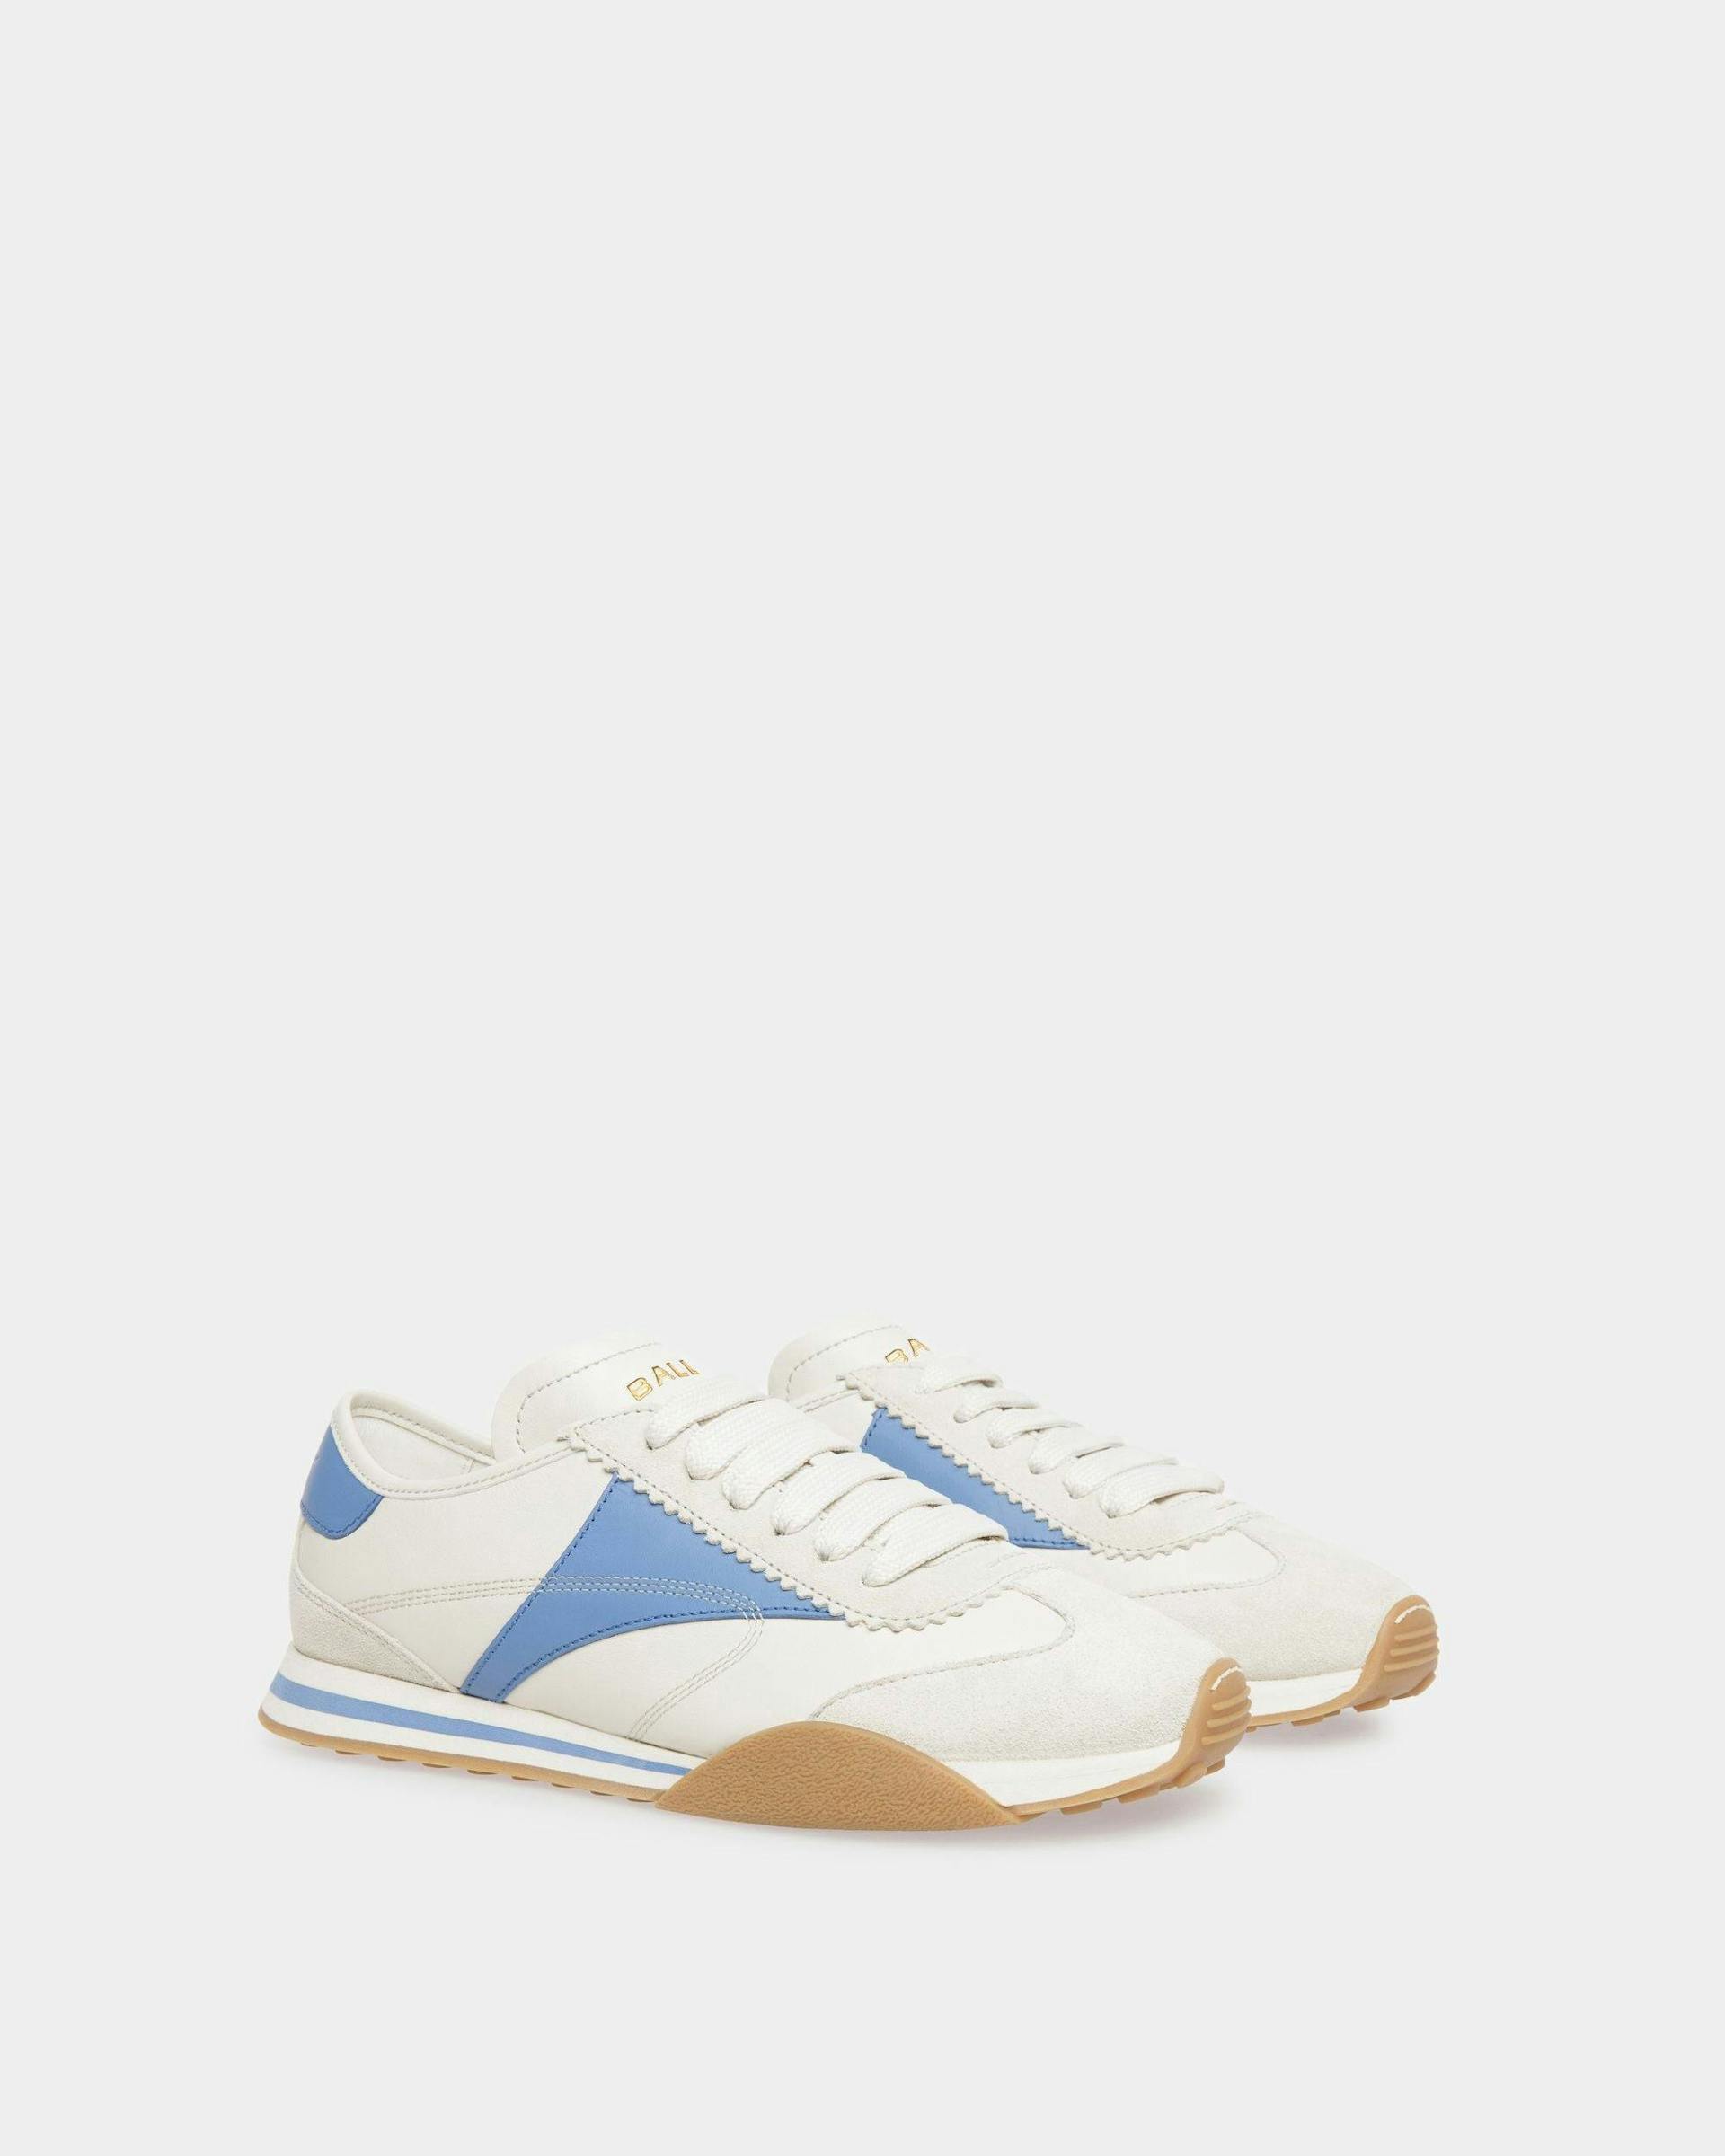 Sussex Sneakers In Dusty White And Blue Leather - Women's - Bally - 02